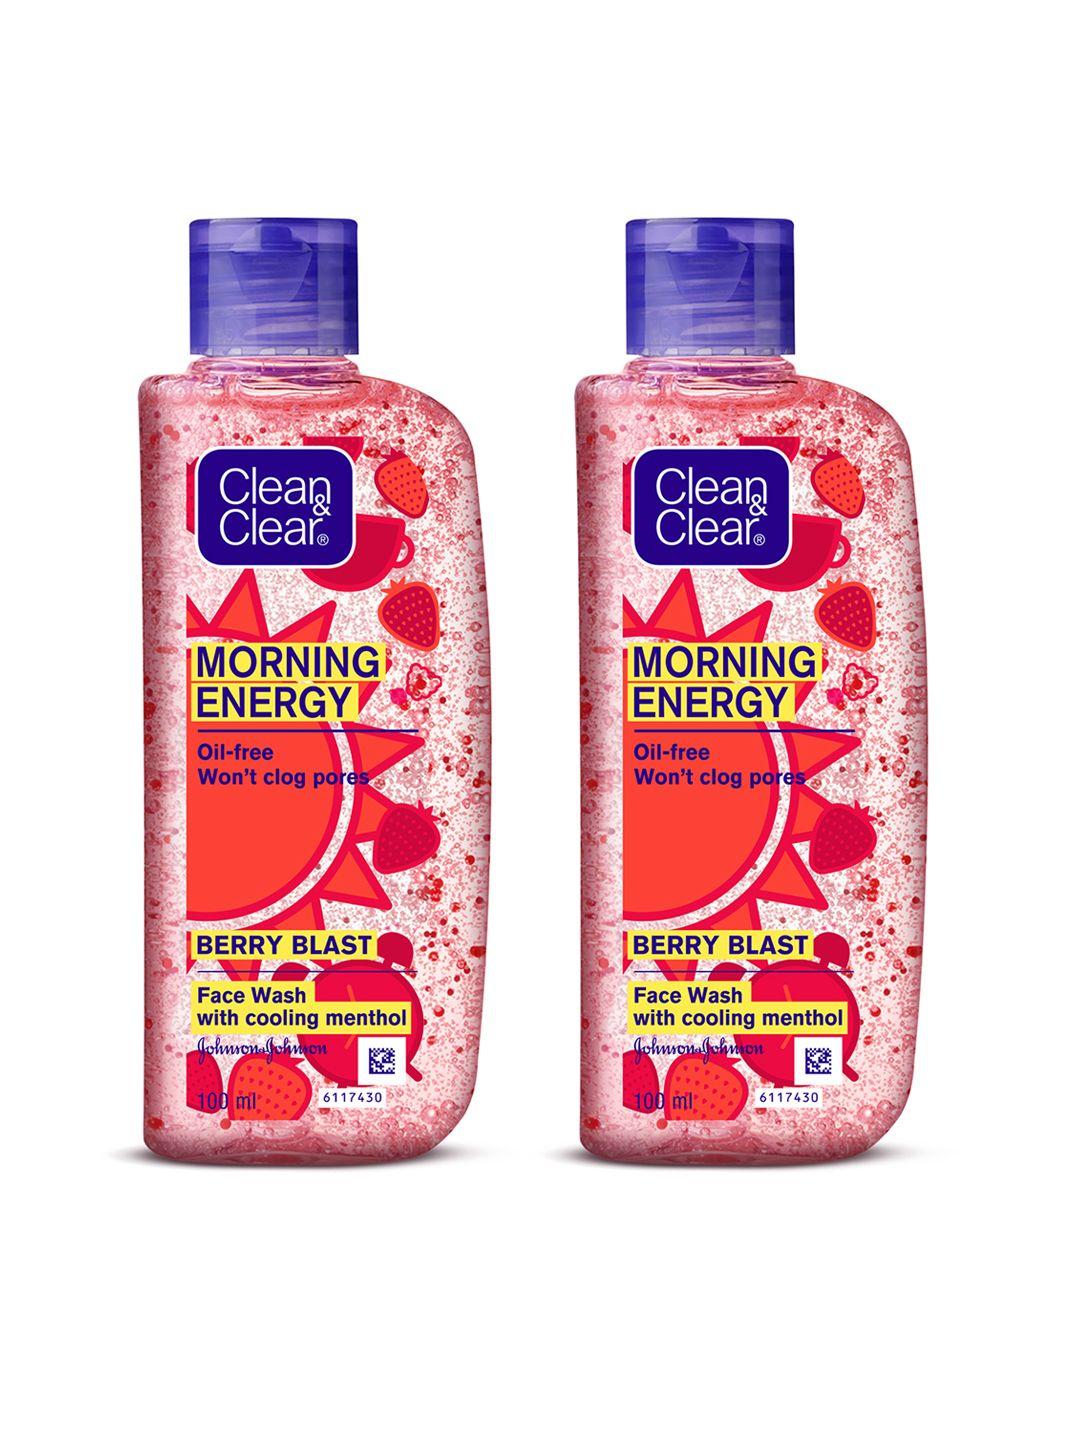 clean&clear set of 2 morning energy berry blast face wash with menthol - 100ml each